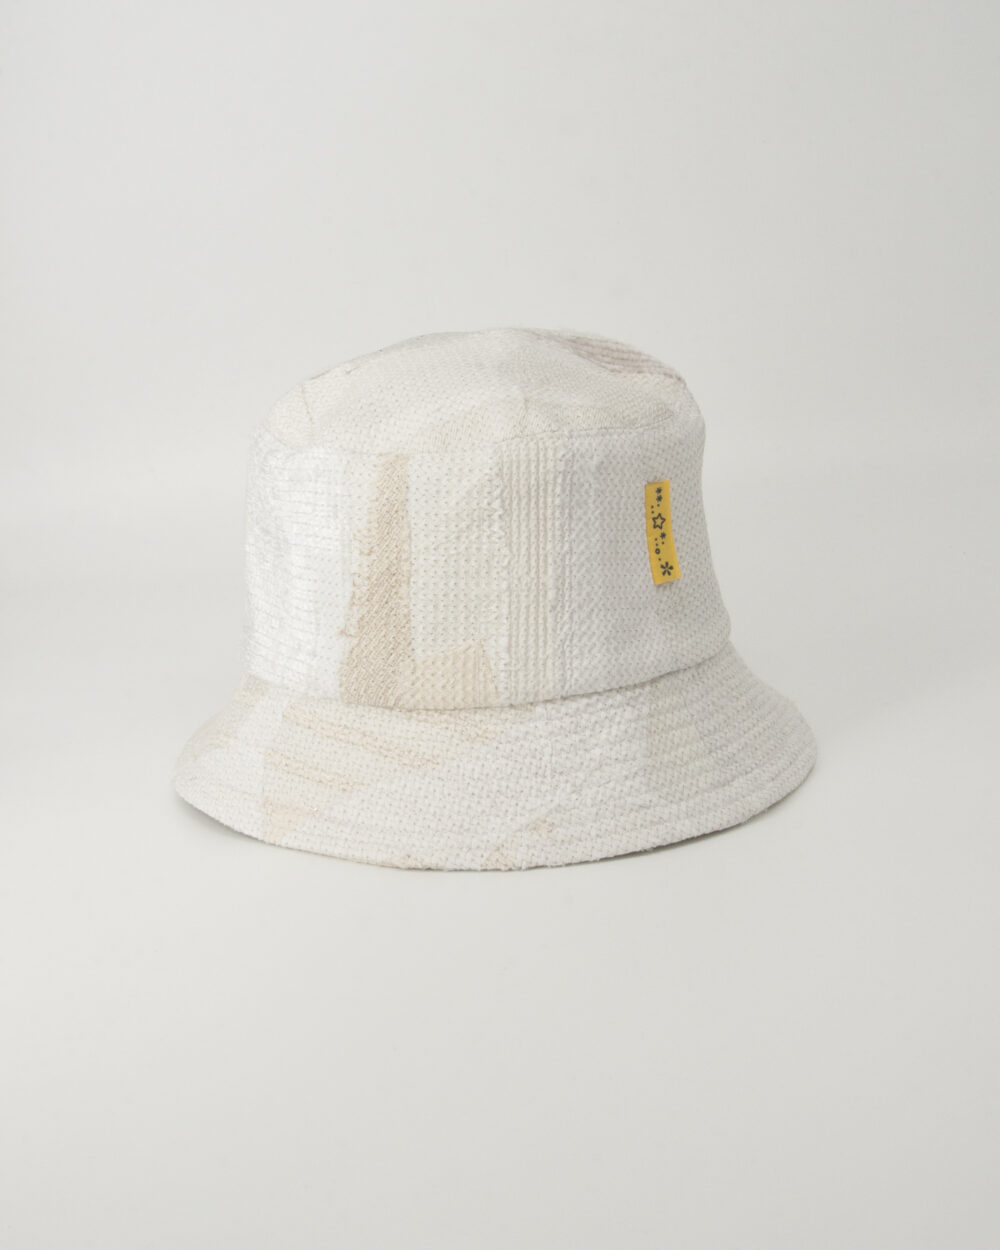 This is an image of a white scrap bucket hat which was made from white fabric waste.